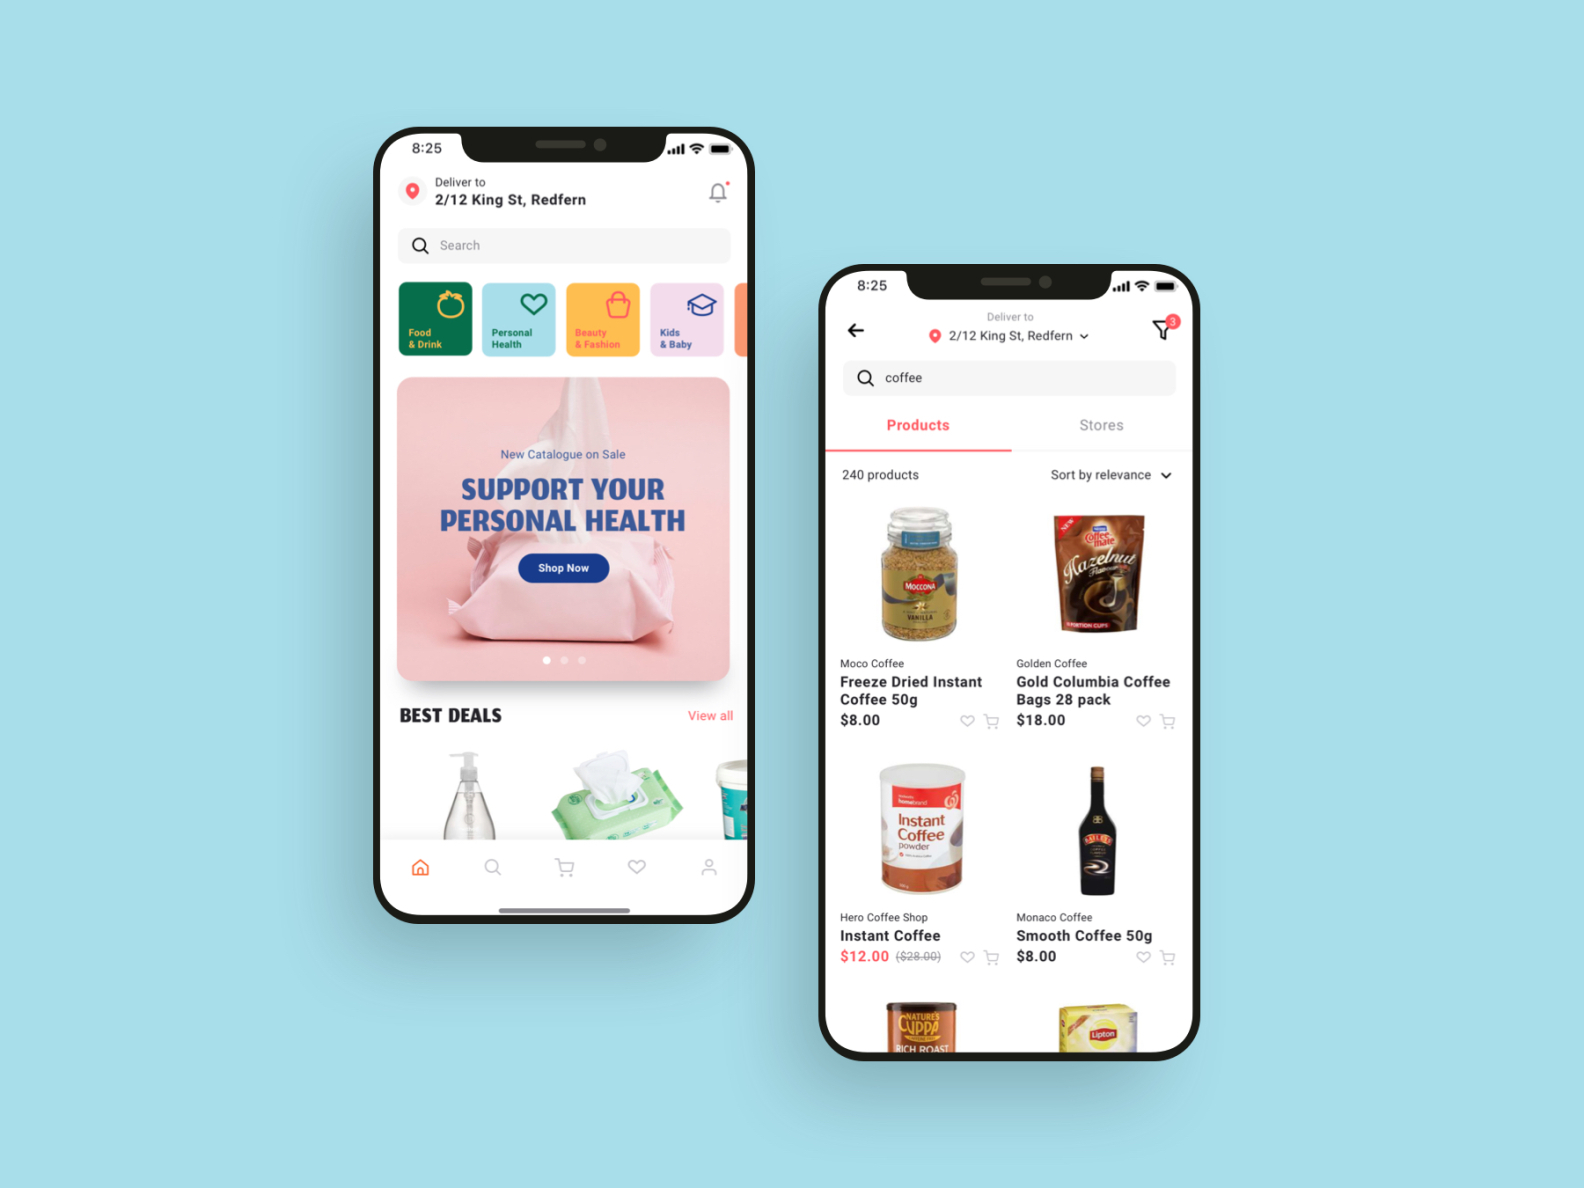 36 Best Images Grocery Delivery Apps Nyc : Pin on Grocery Delivery App